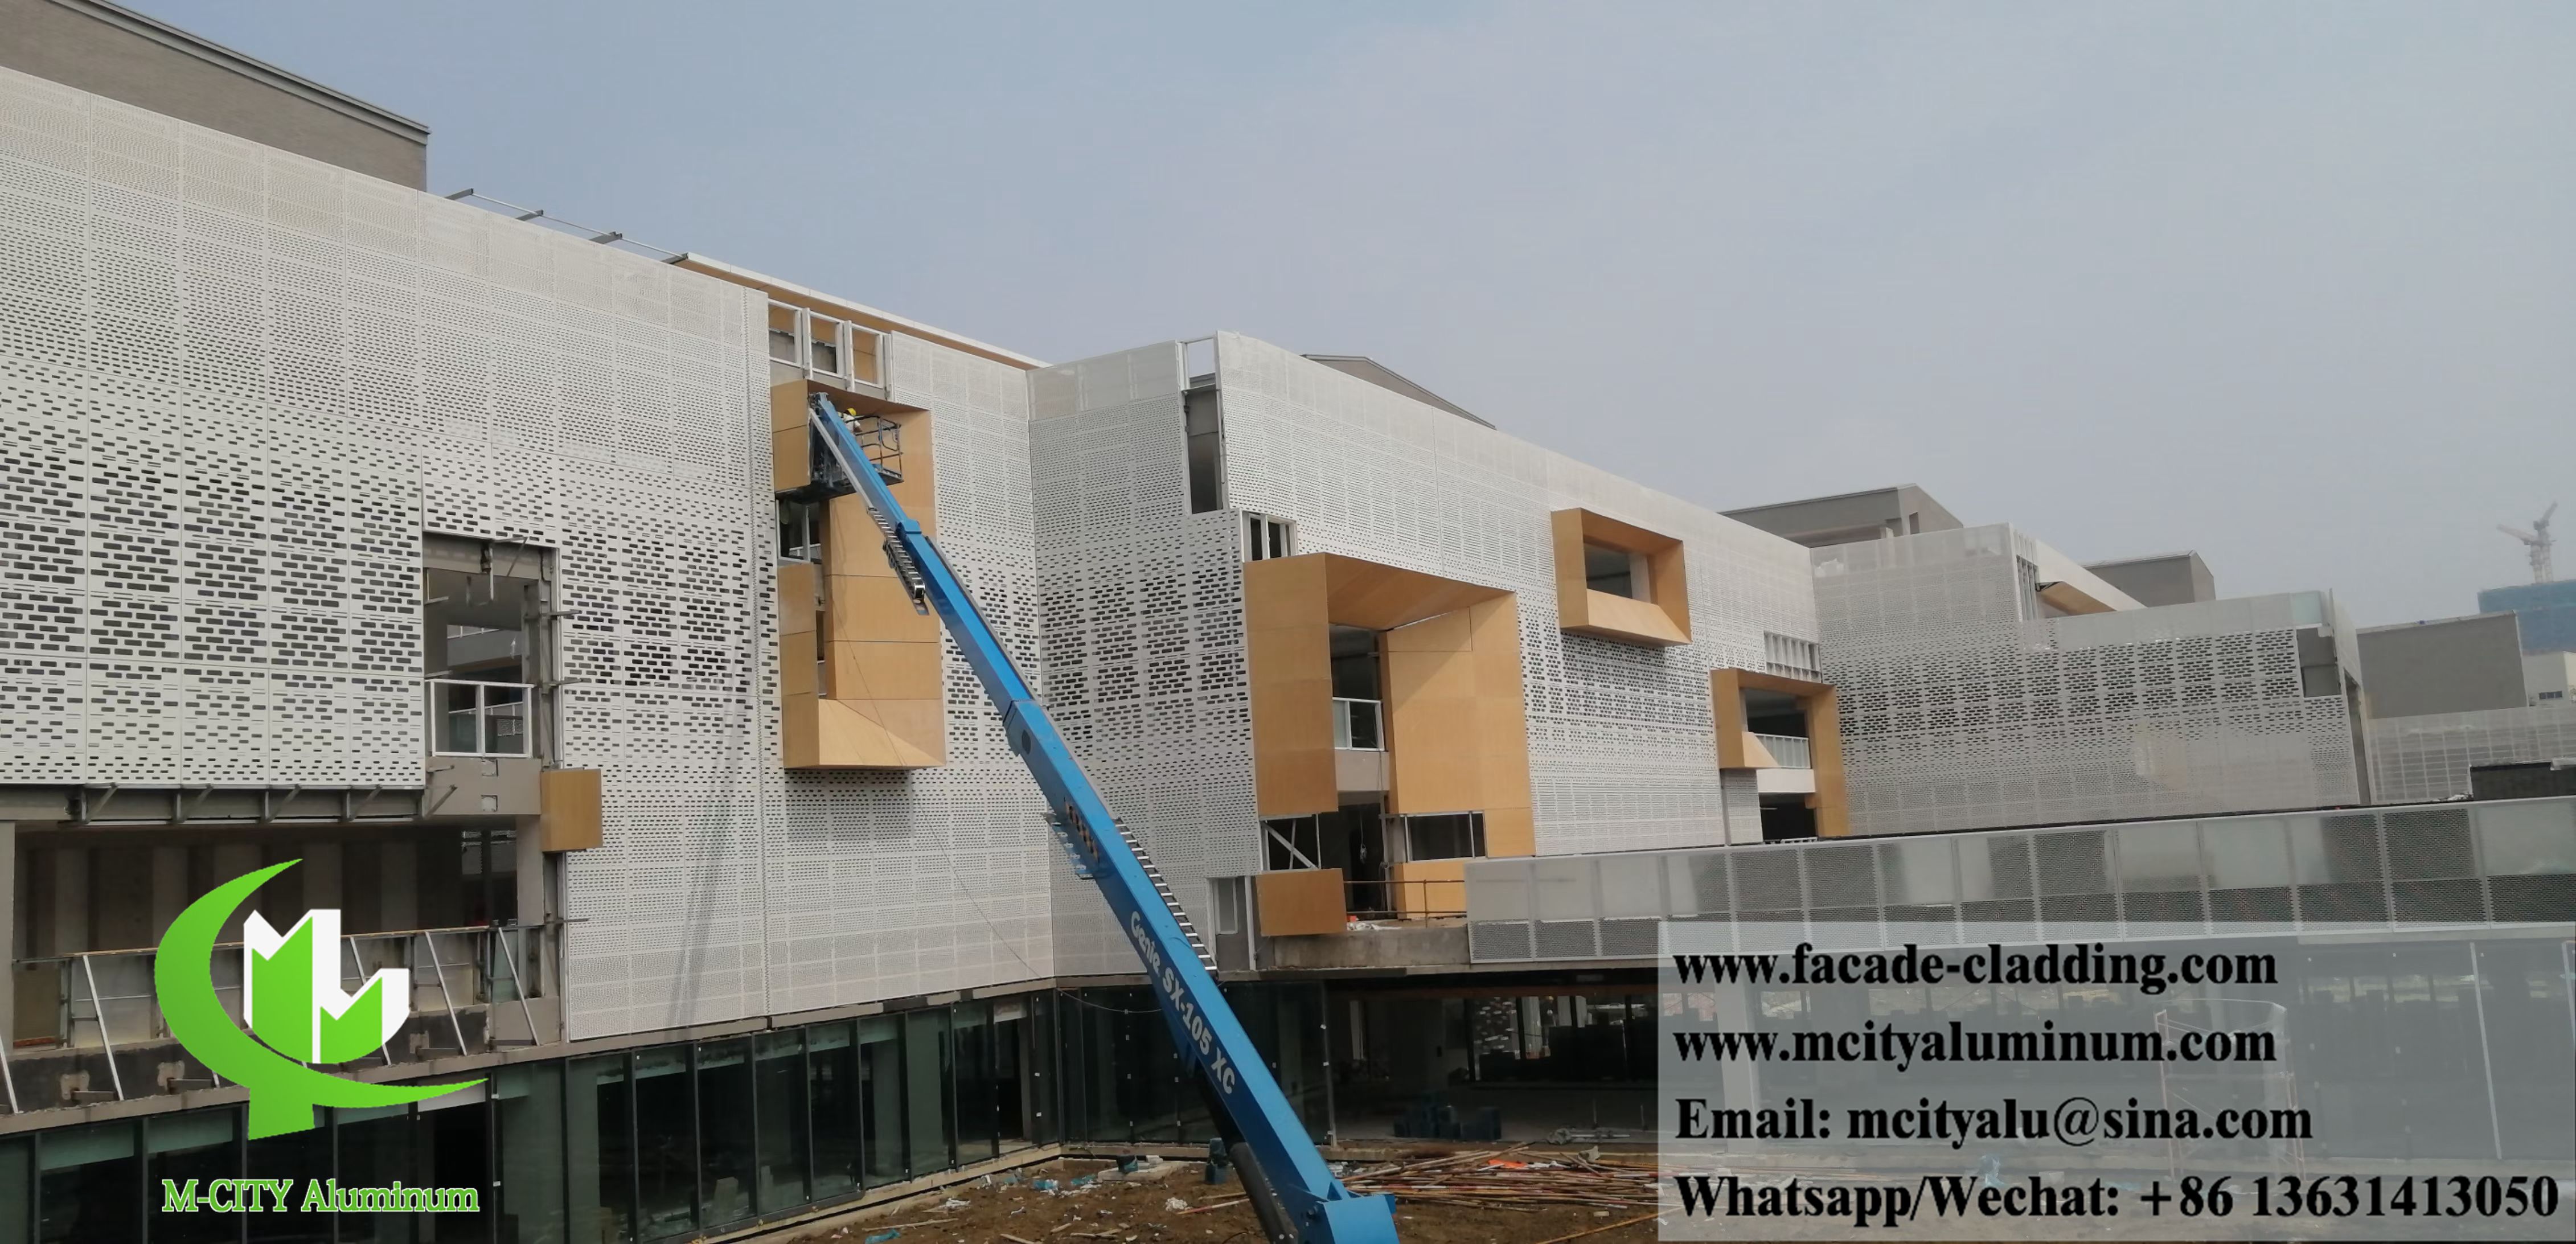 Perforated metal panels solid aluminum wall cladding with decorative patterns white color